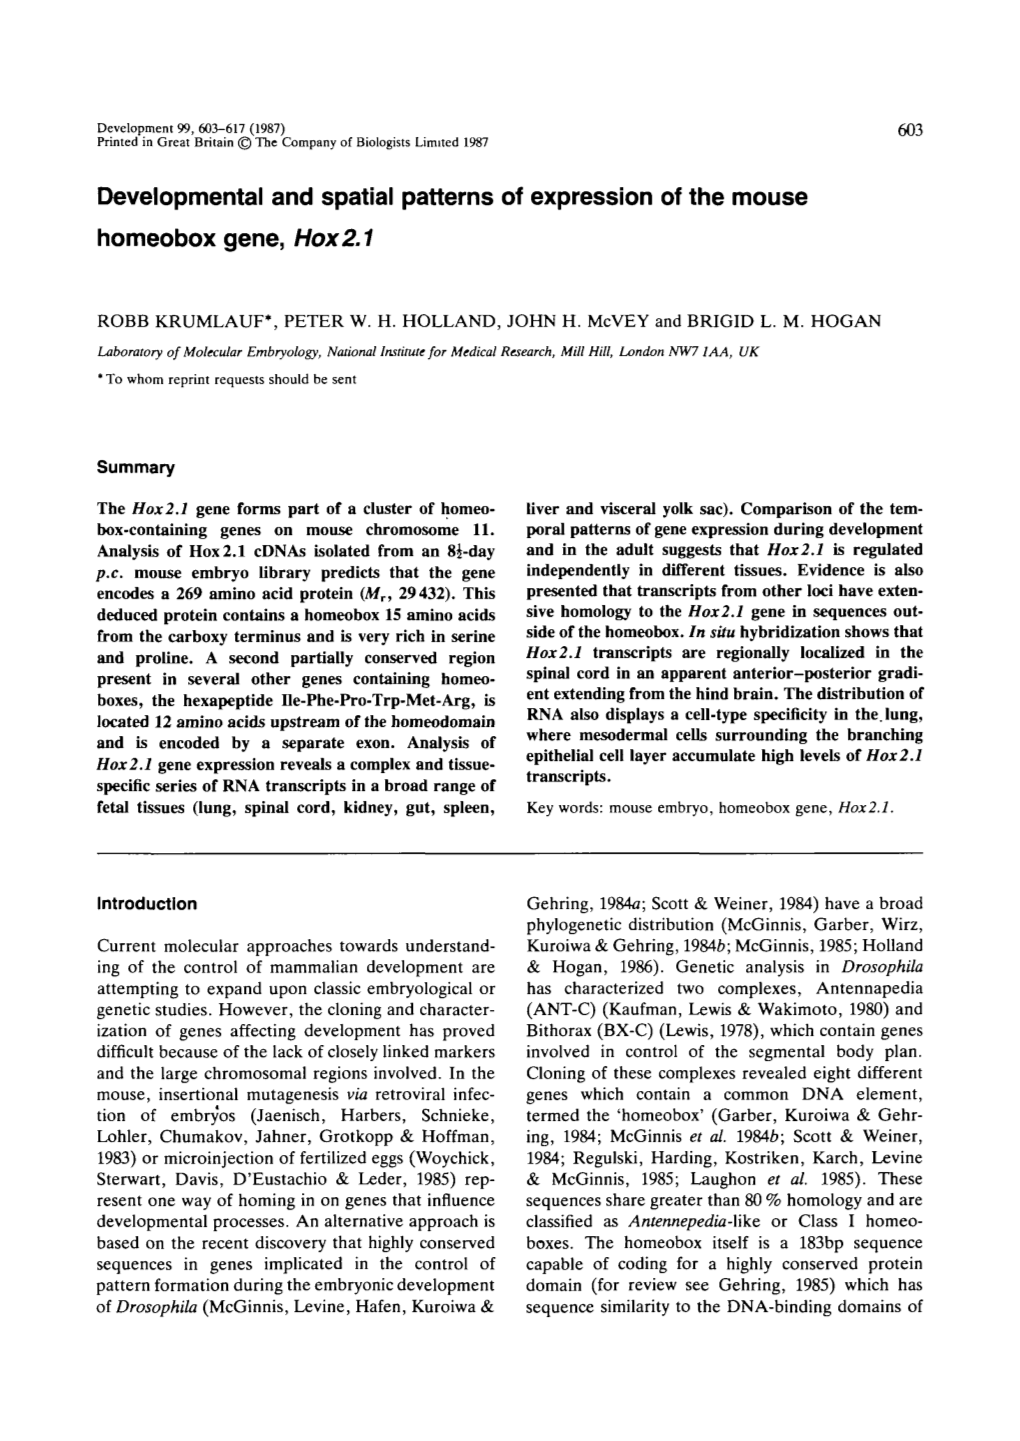 Developmental and Spatial Patterns of Expression of the Mouse Homeobox Gene, Hox2.1